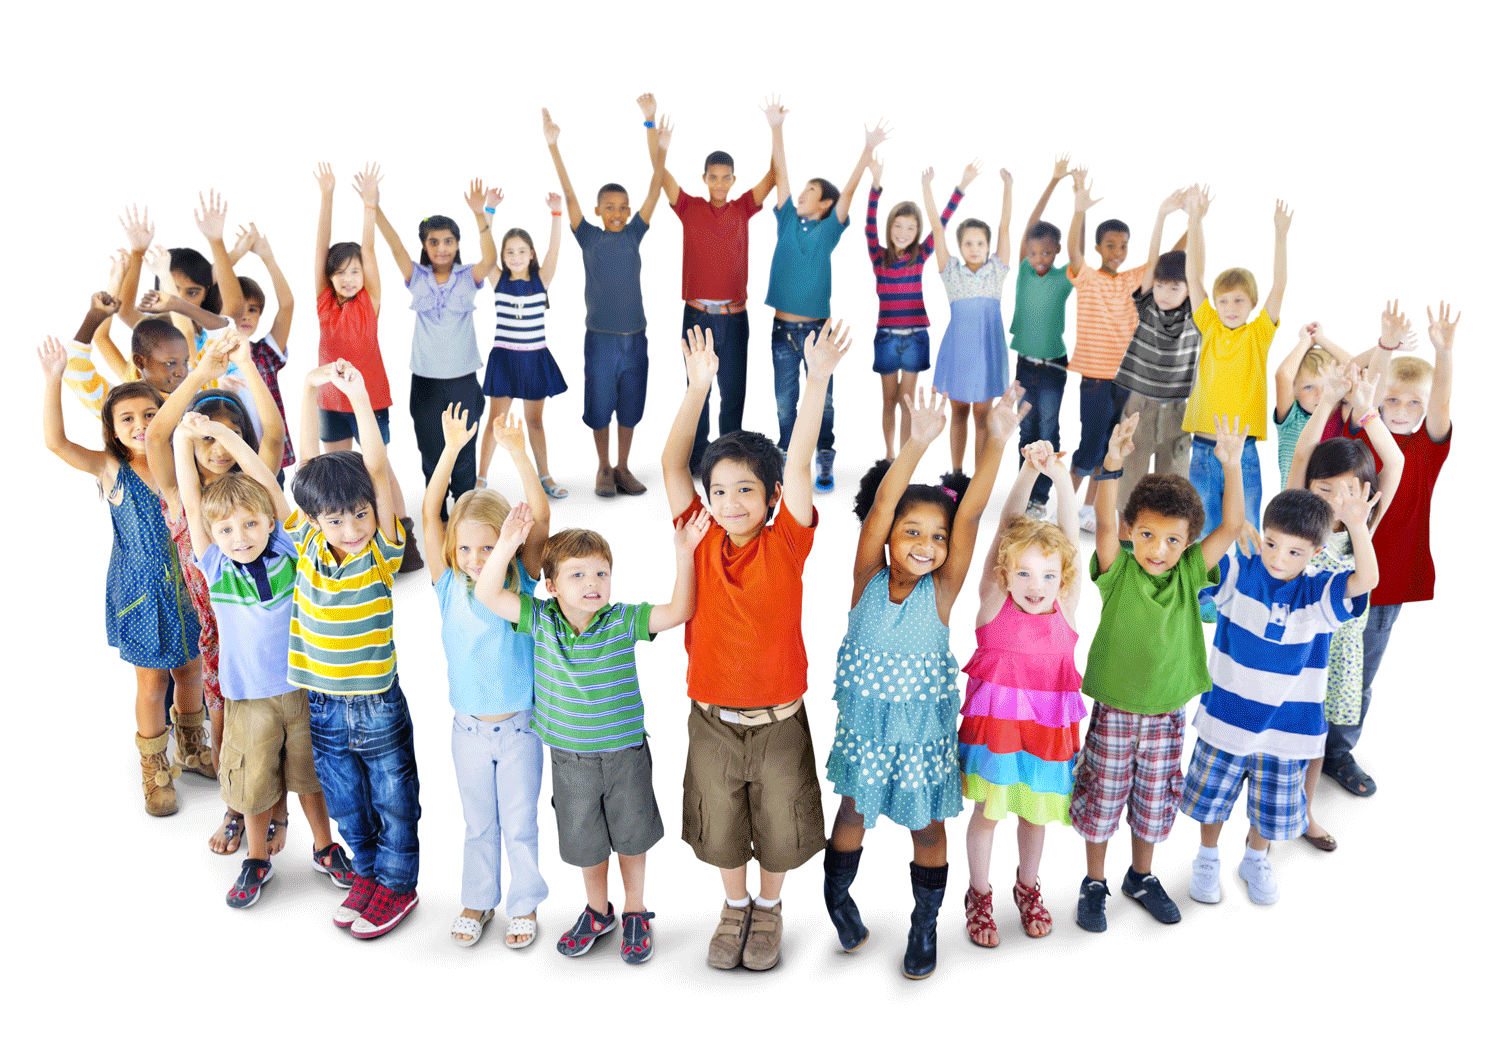 Children celebrate in a circle with their arms raised high.